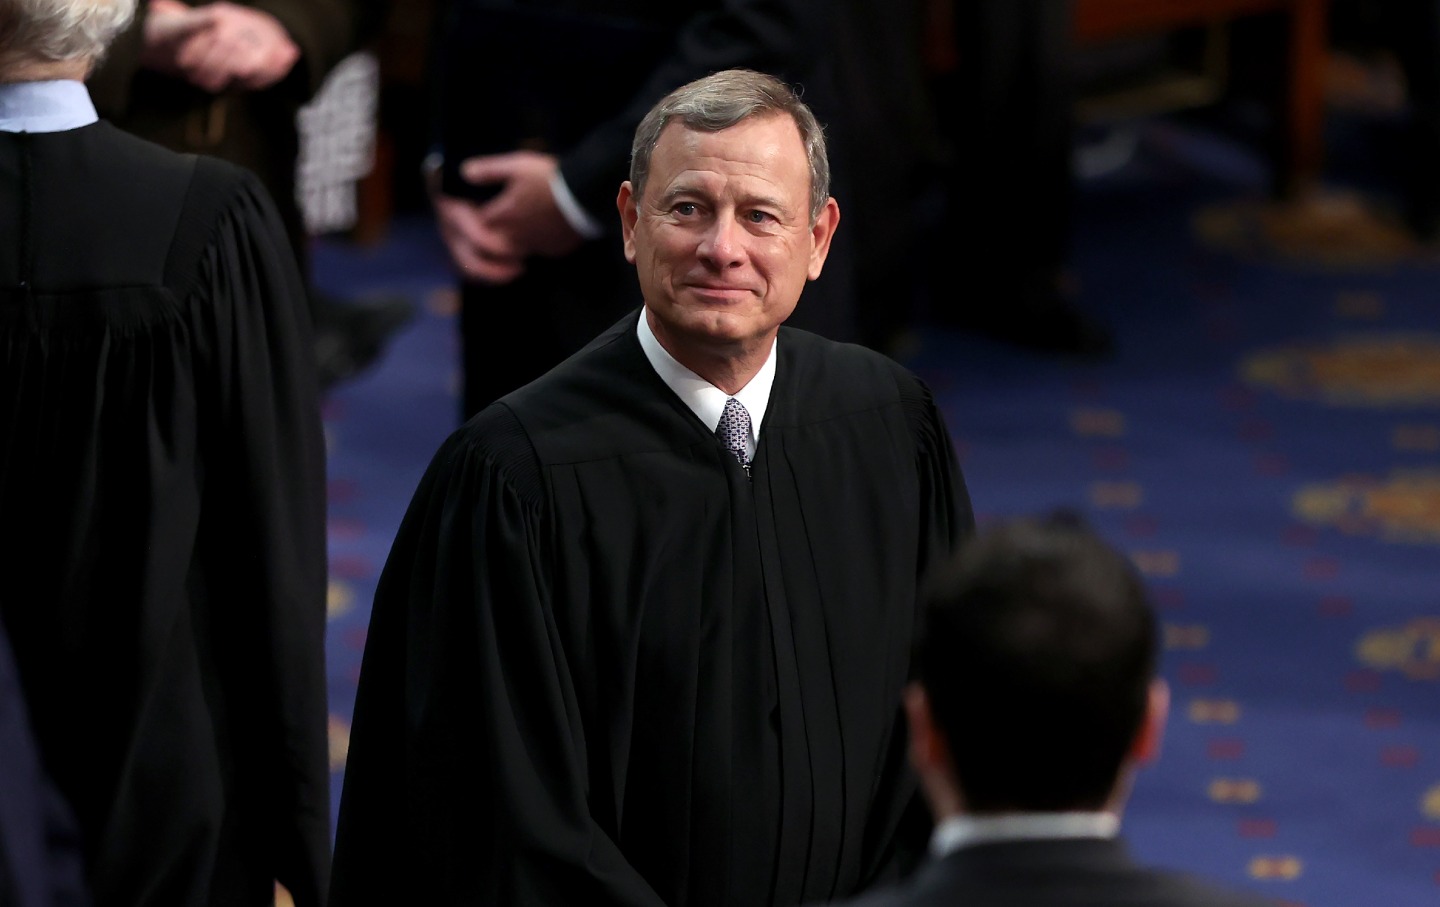 John Roberts at the 2022 State of the Union.